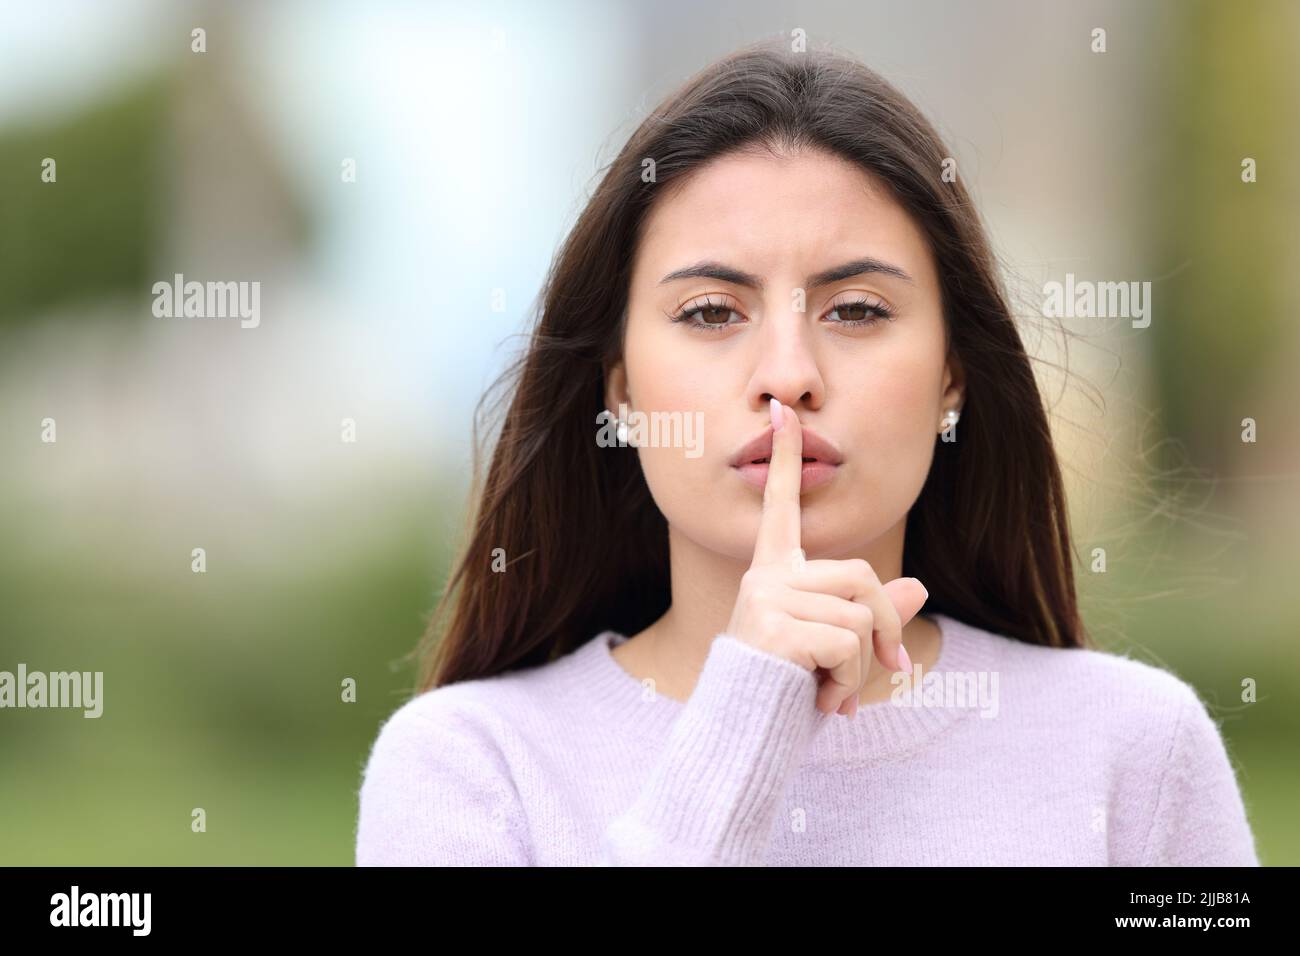 Front view portrait of a serious teen asking for silence in the street Stock Photo